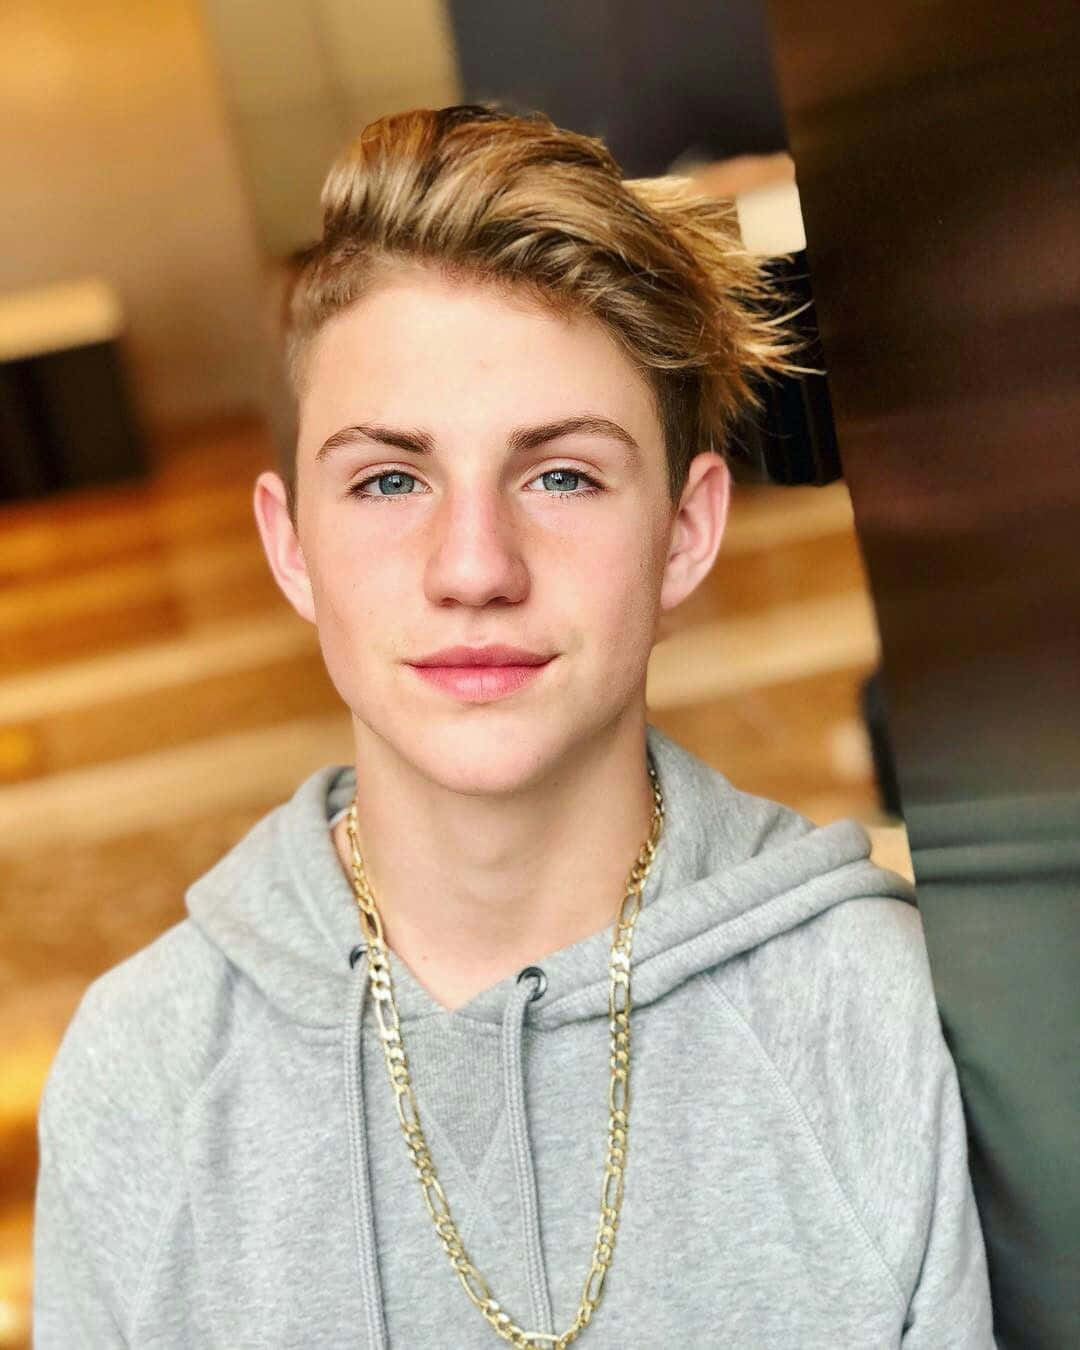 Mattyb With Chain Necklace Wallpaper